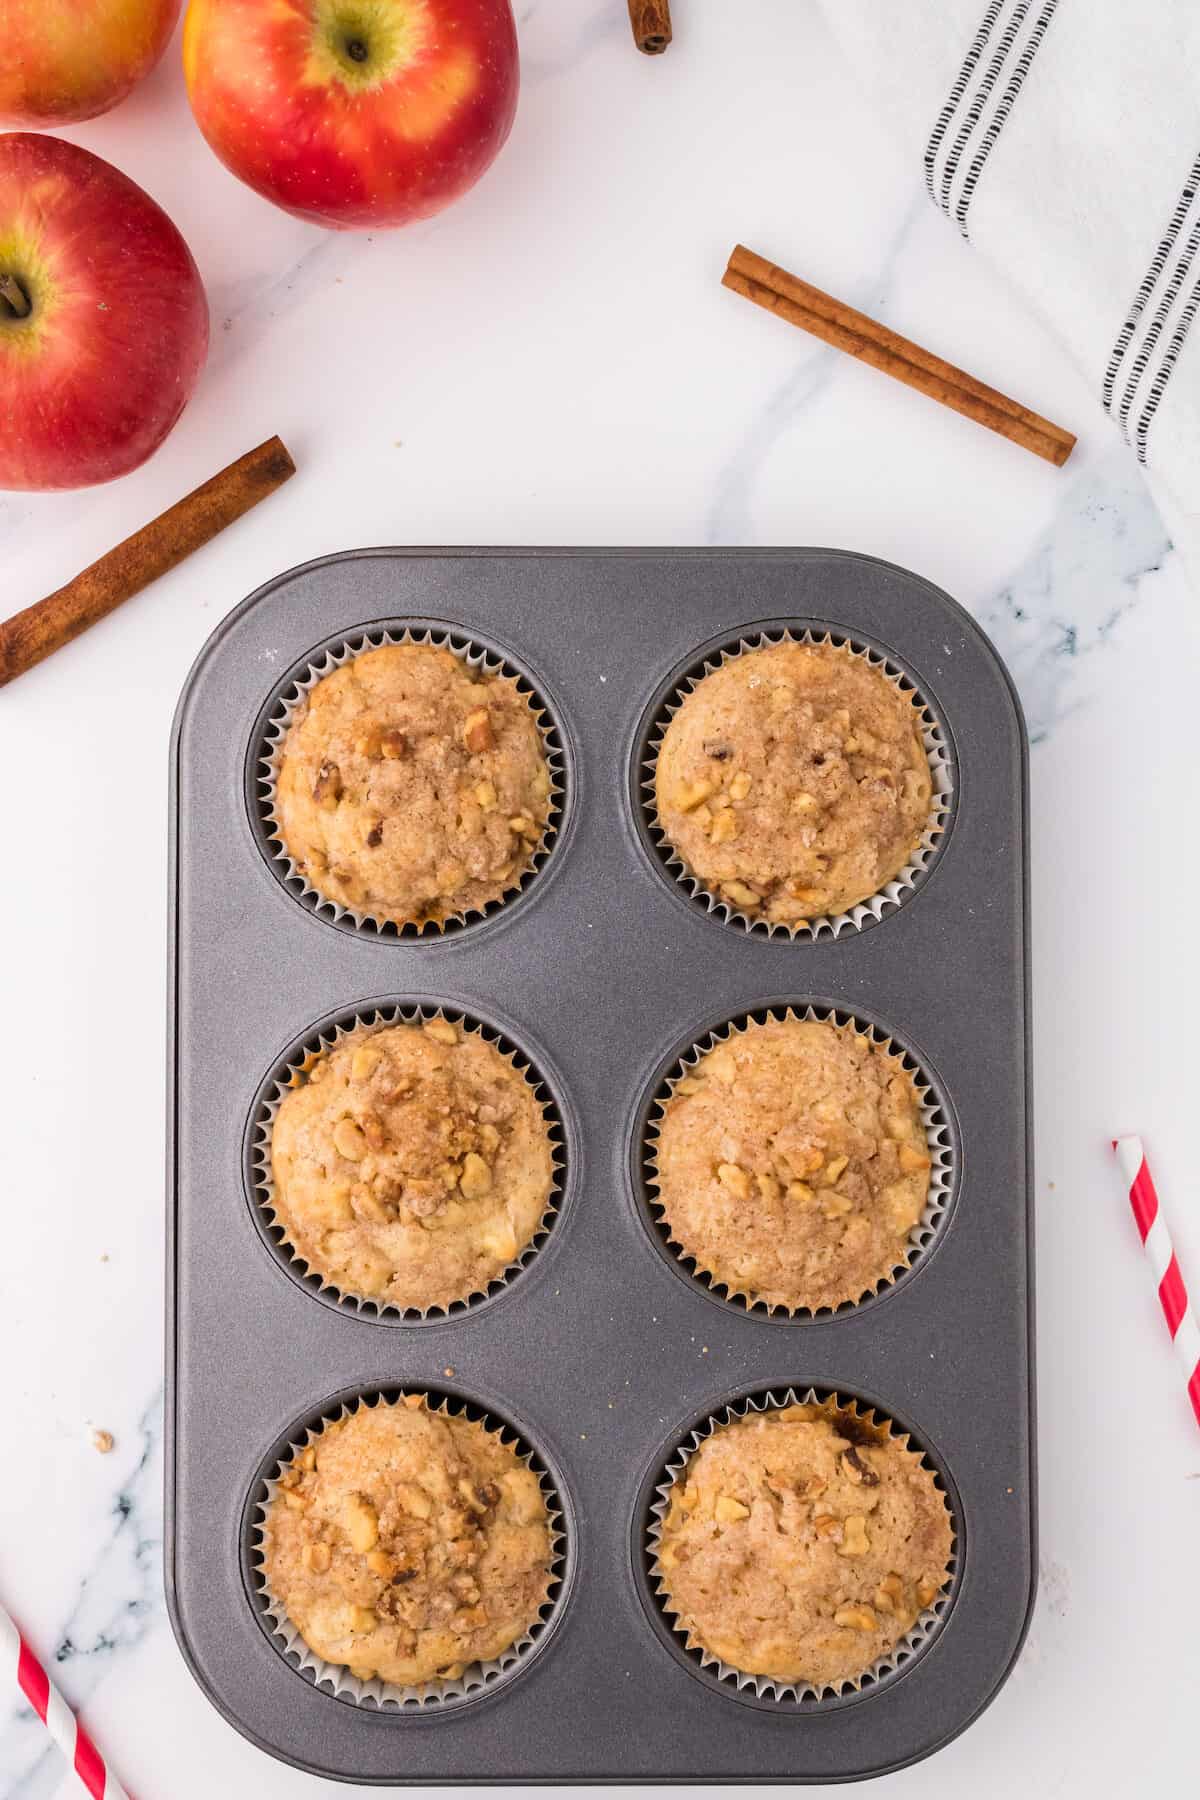 finished apple muffins in a the muffin tin with liners.